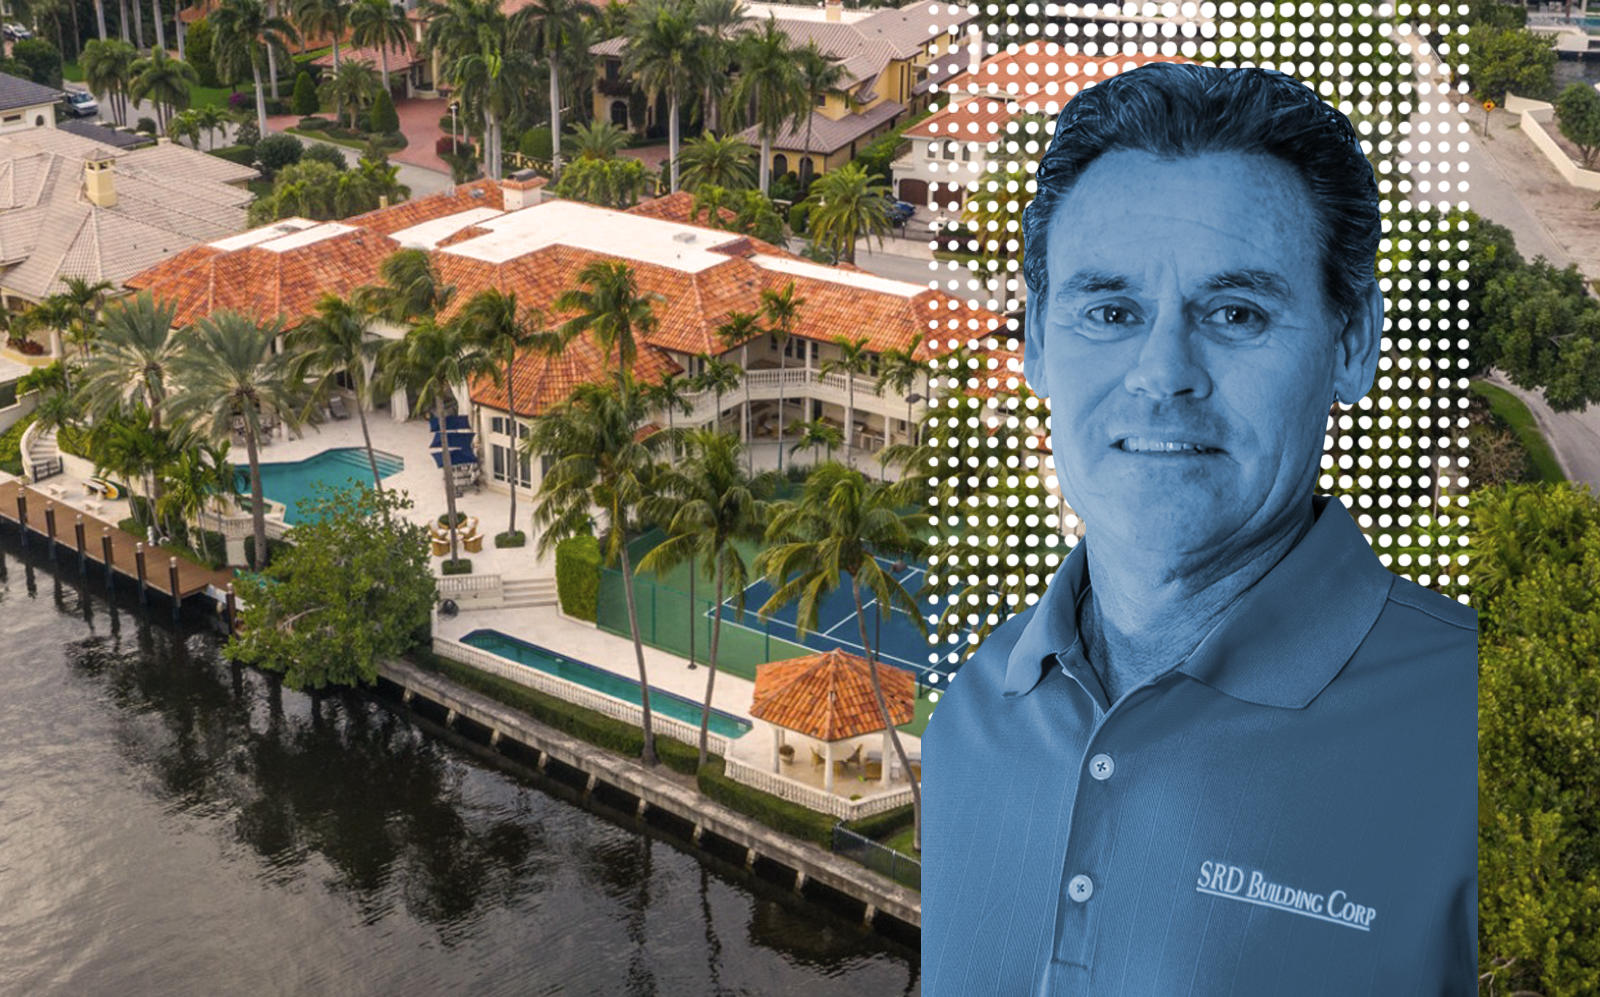 Steven R. Dingle and the property he sold at 298 West Key Palm Road. (SRD Building Corp, Royal Palm)